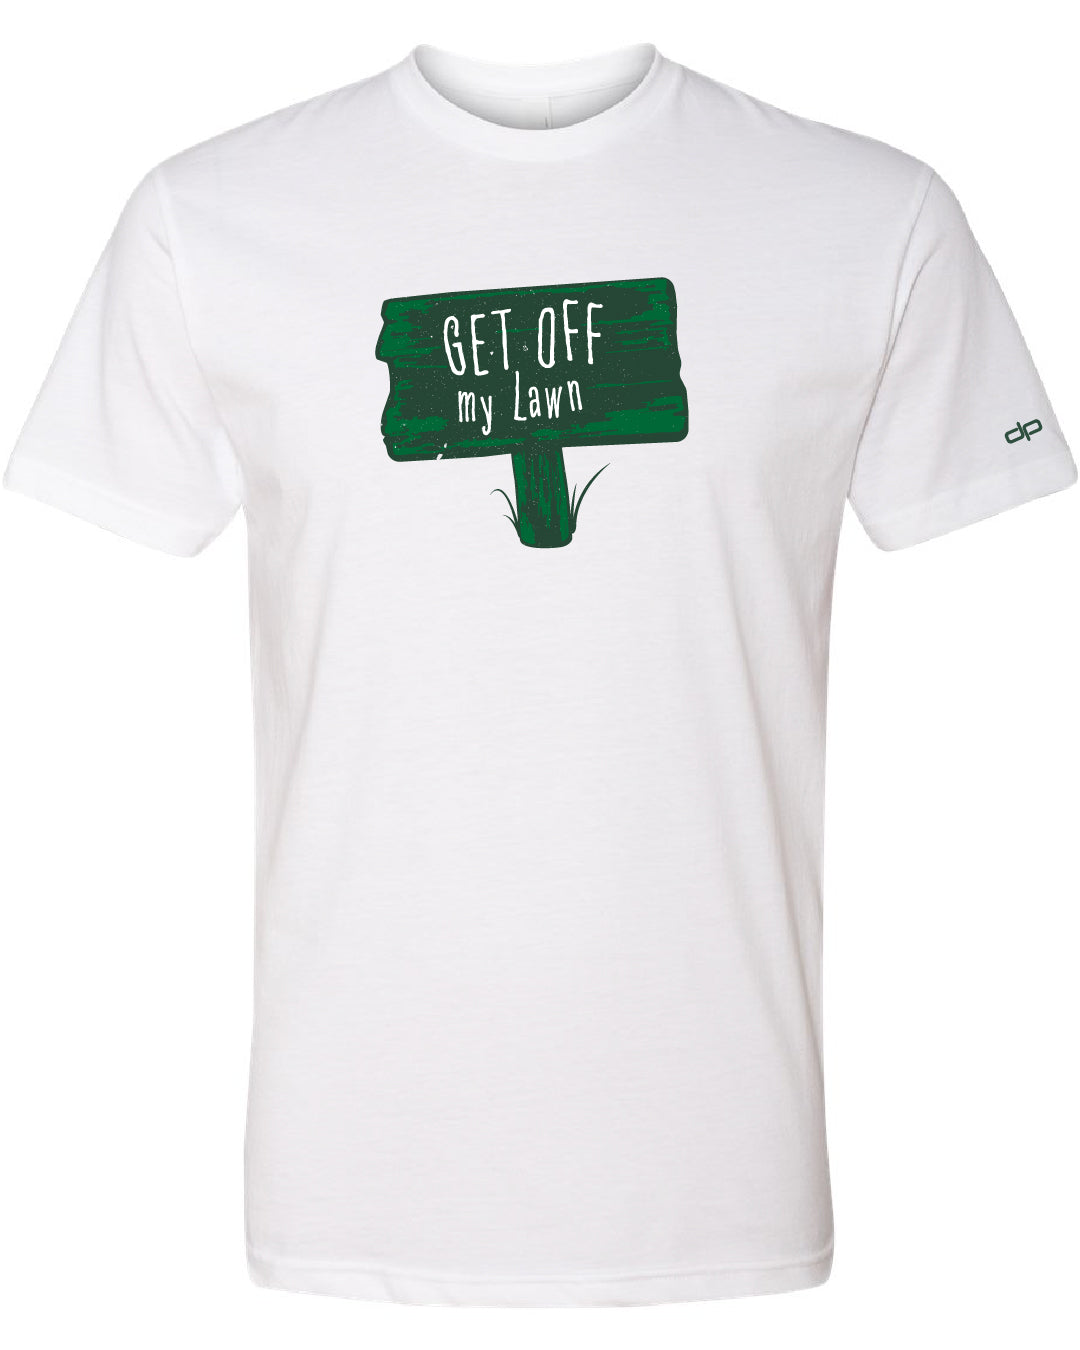 Get Off My Lawn T-Shirt